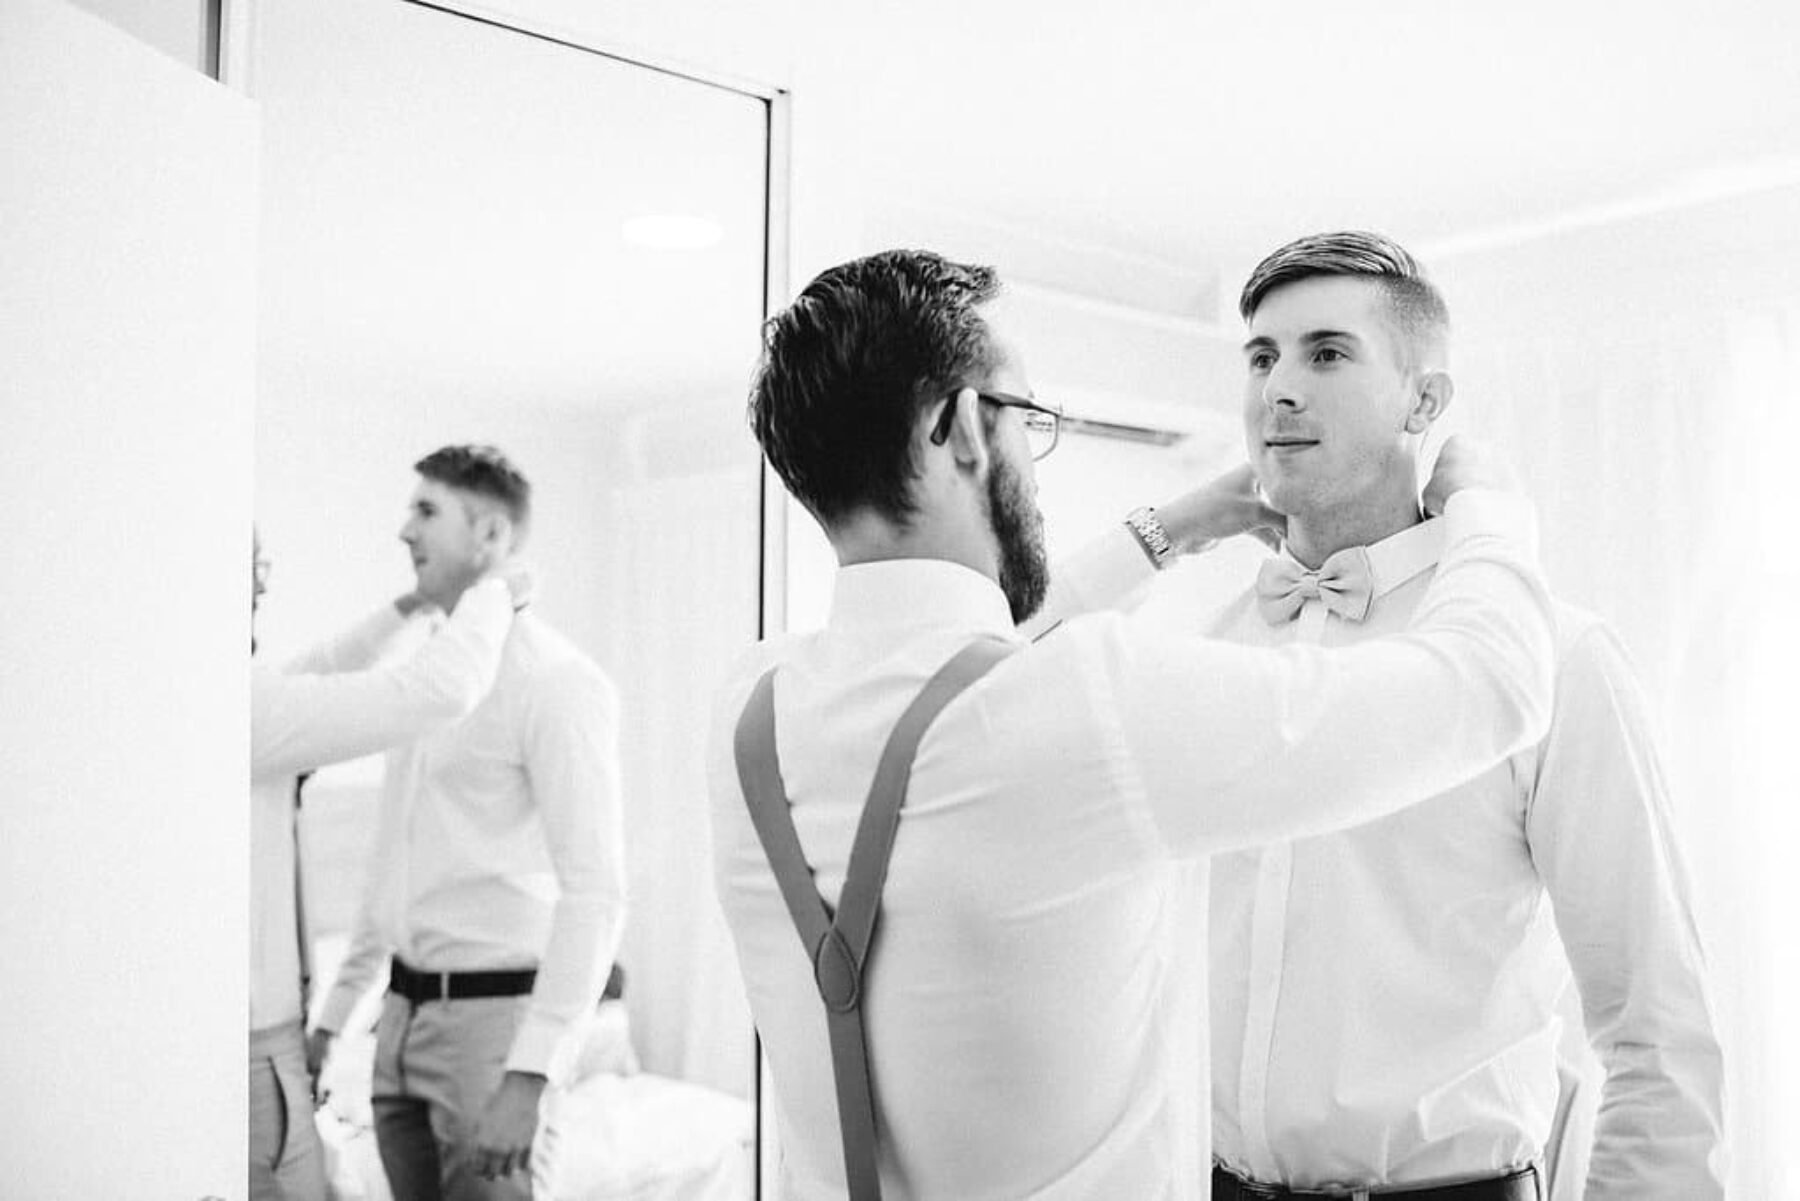 Little Creatures wedding | Photography by Fiona Vail